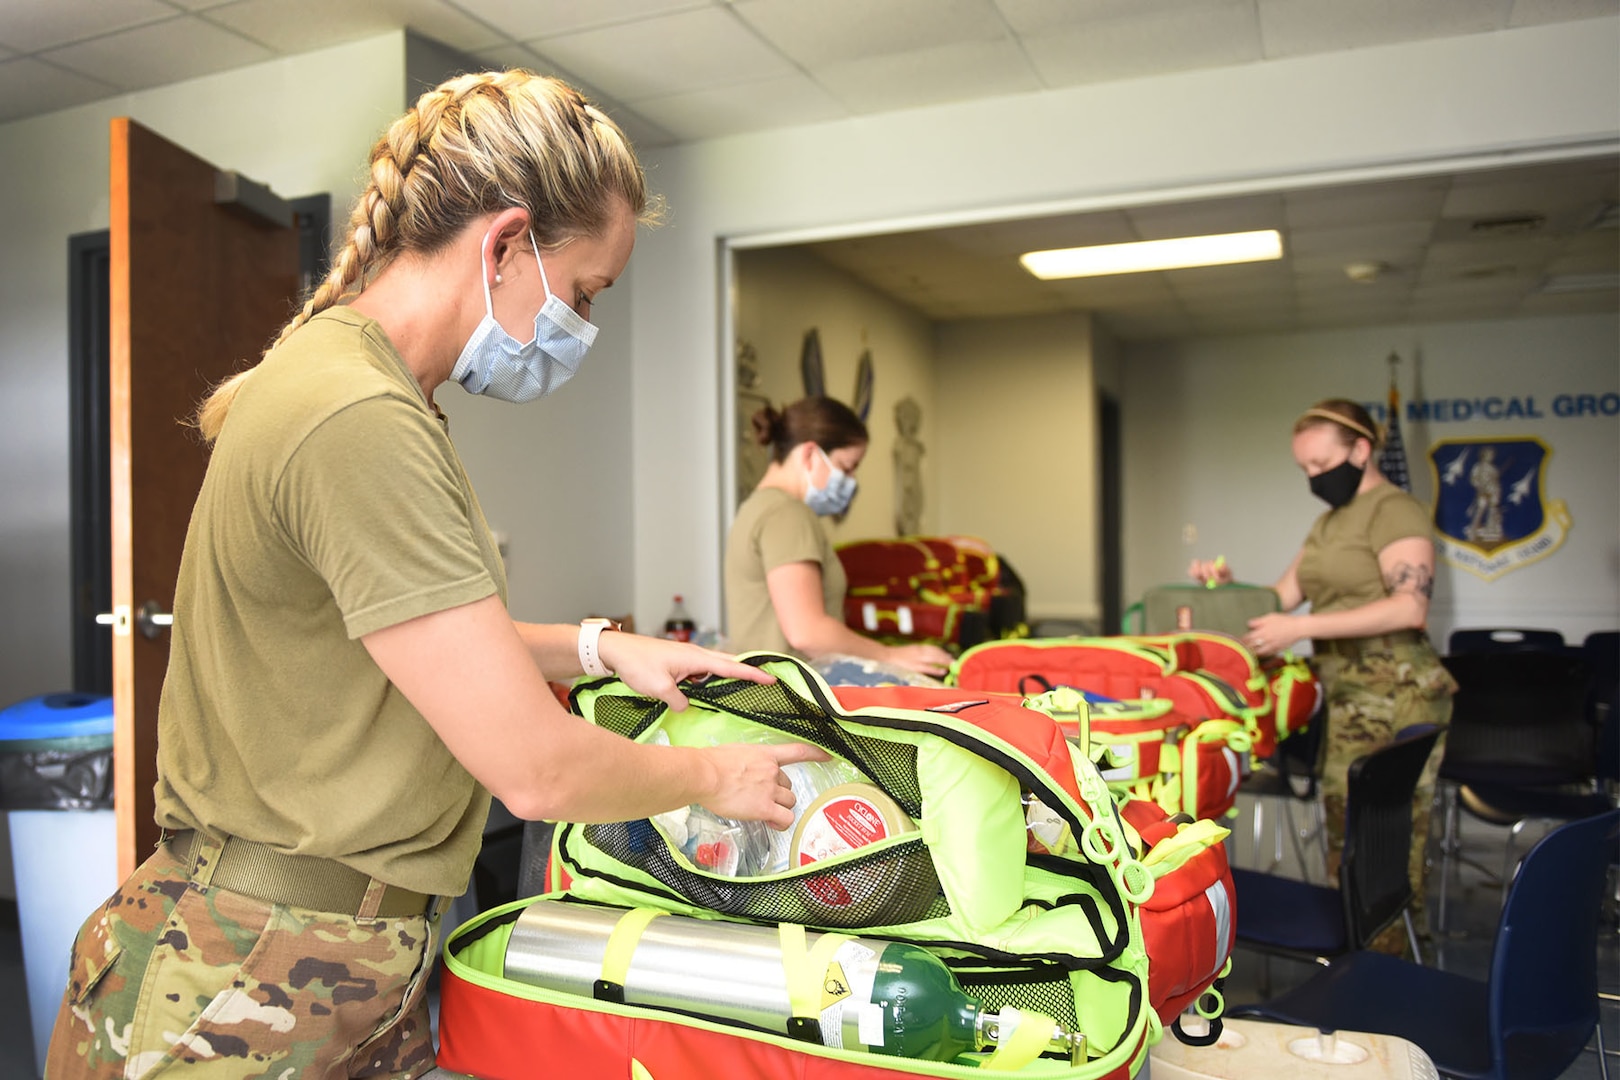 Airmen of the 159th Medical Group perform equipment and inventory checks to ensure proper response to medical emergencies to the aftermath of Hurricane Ida in Belle Chasse, Louisiana, Aug. 31, 2021. The 159th Medical Group maintains mission readiness to be fully prepared to respond to natural disasters.